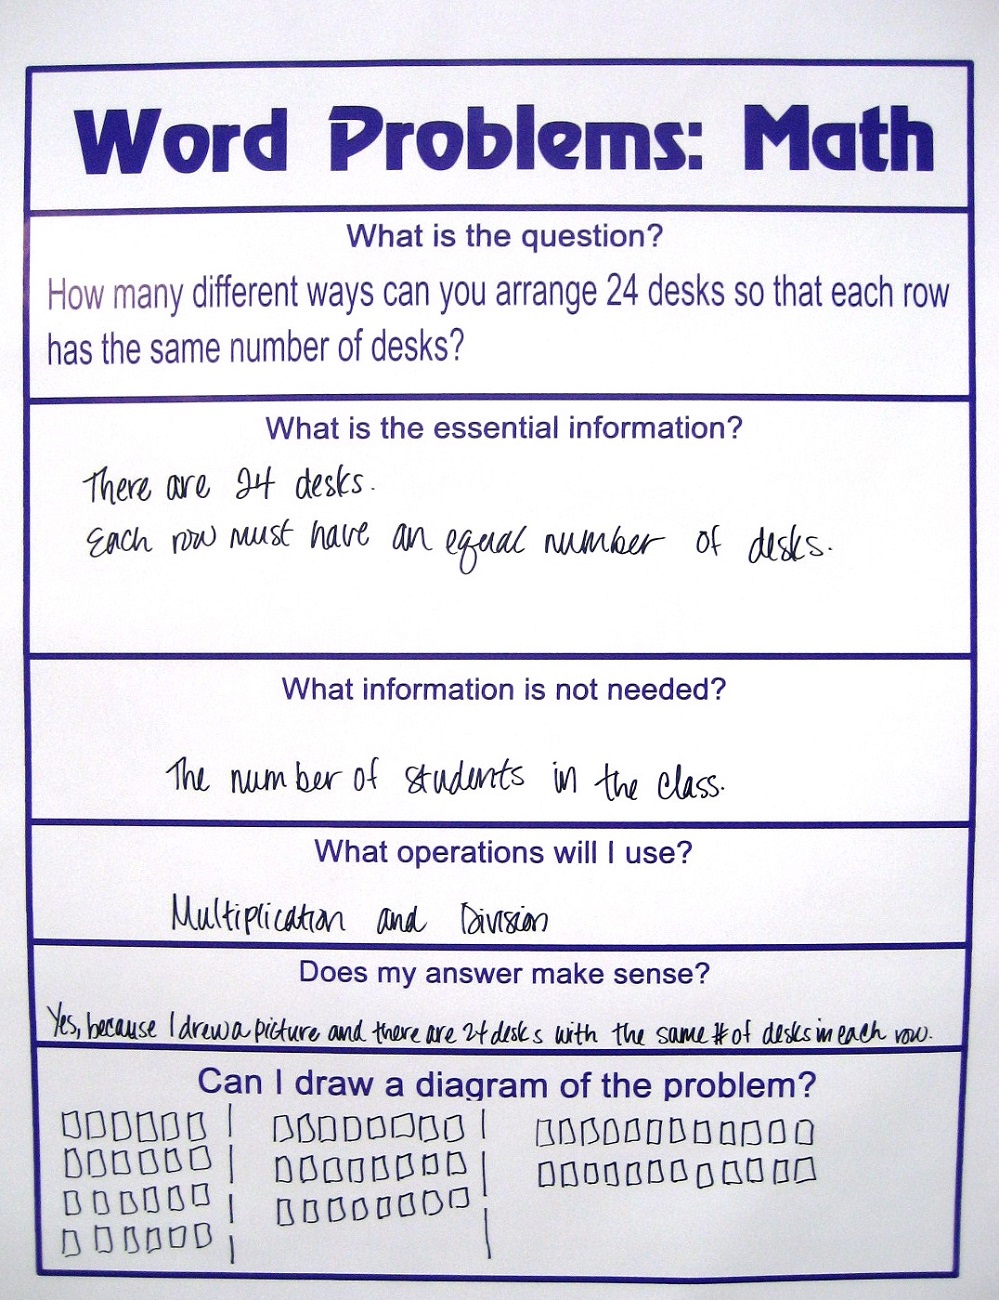 Free Picture Words Problems | Activity Shelter